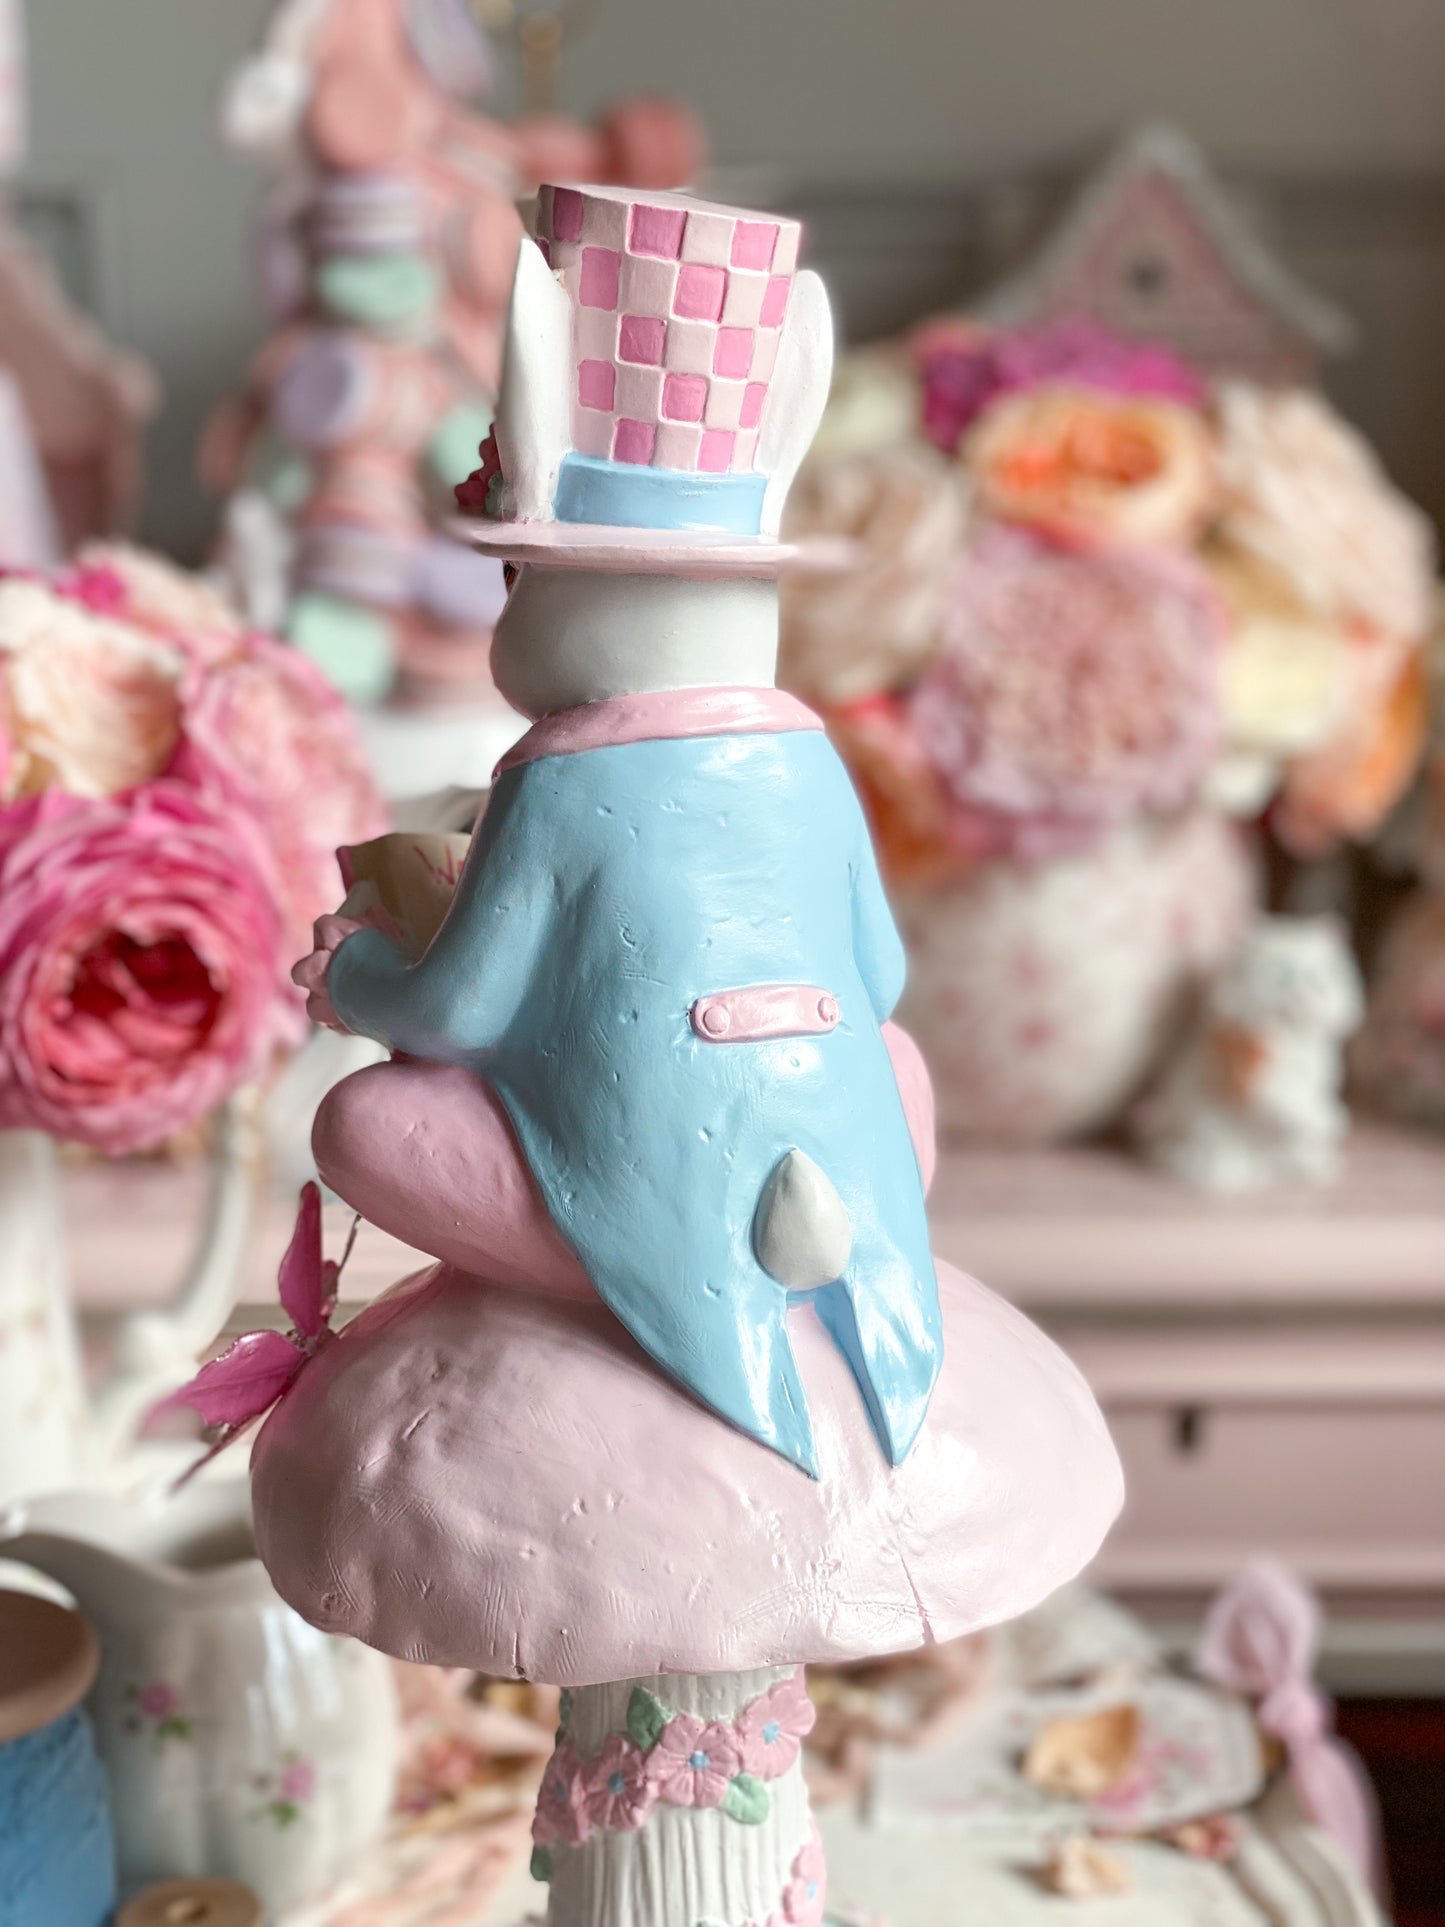 Bespoke Hand Painted Pastel Pink & Blue Mad Hatter Bunny Reading Book of Alice in Wonderland on a Mushroom